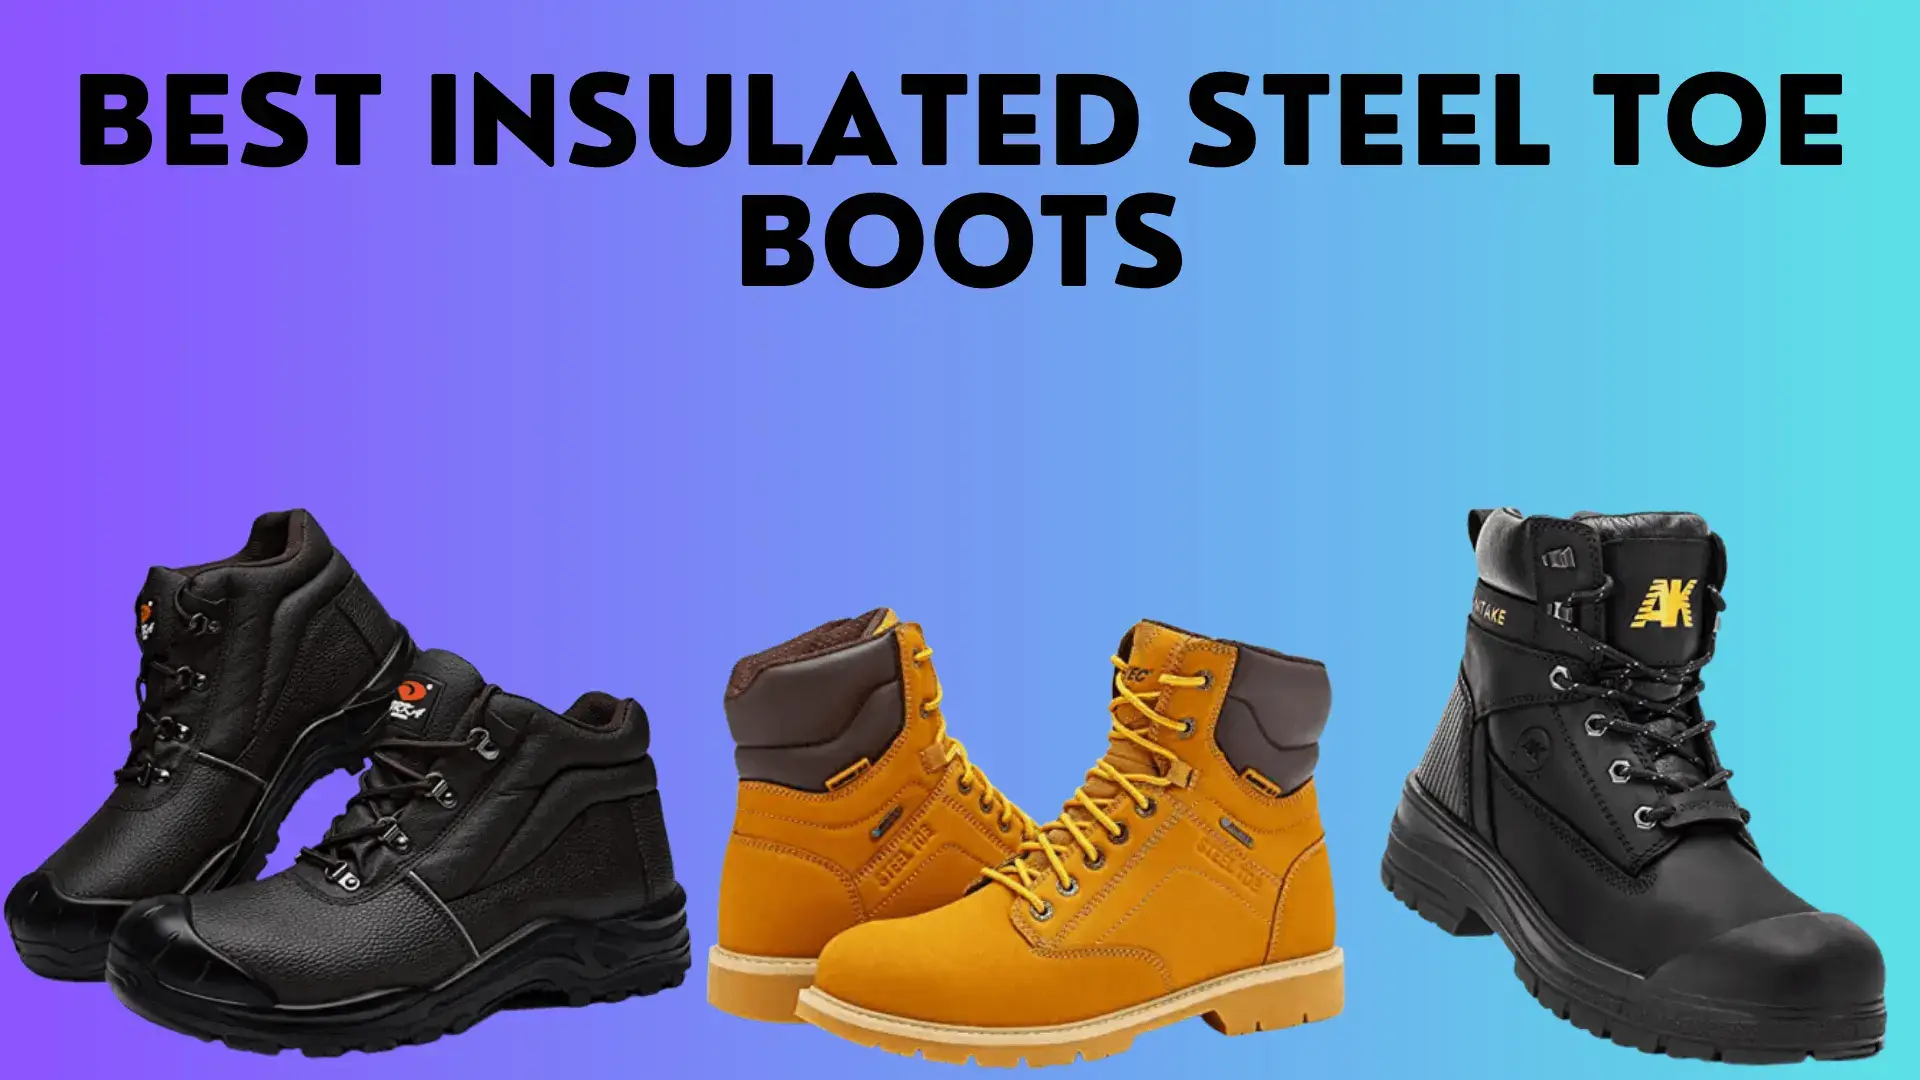 Best insulated steel toe boots